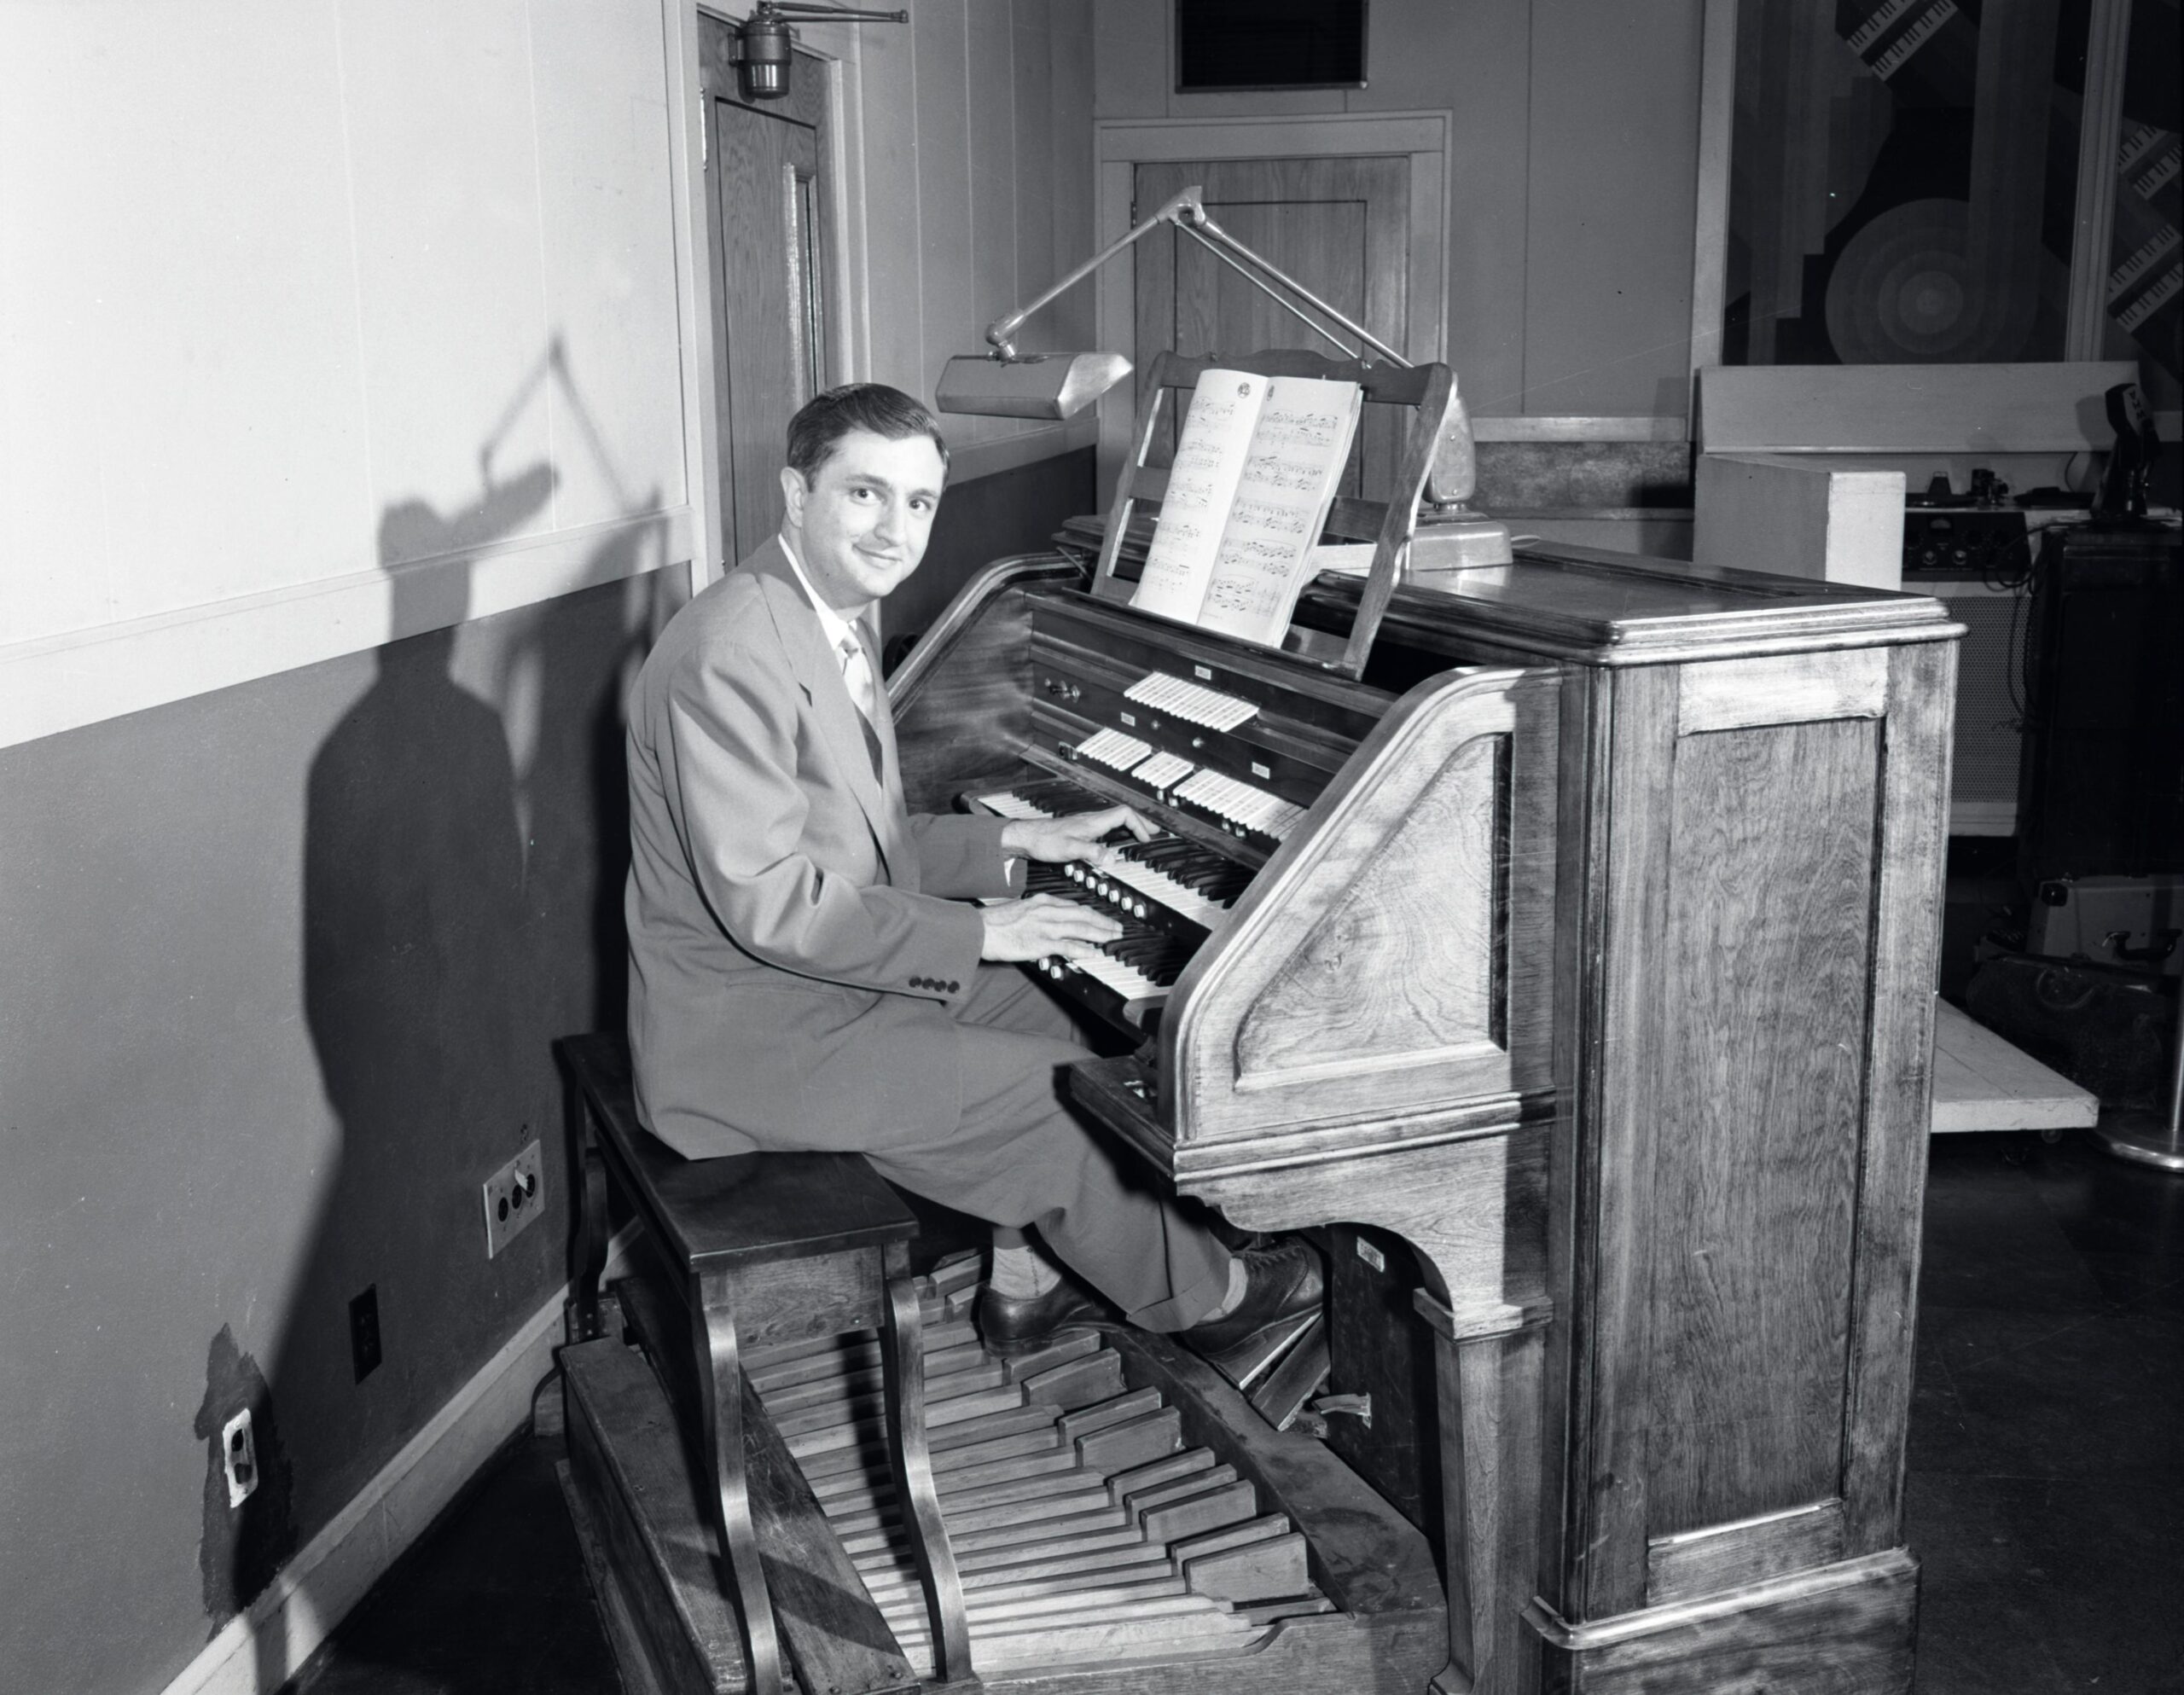 Composer Don Voegeli poses for a picture at a small organ in the WHA studio.